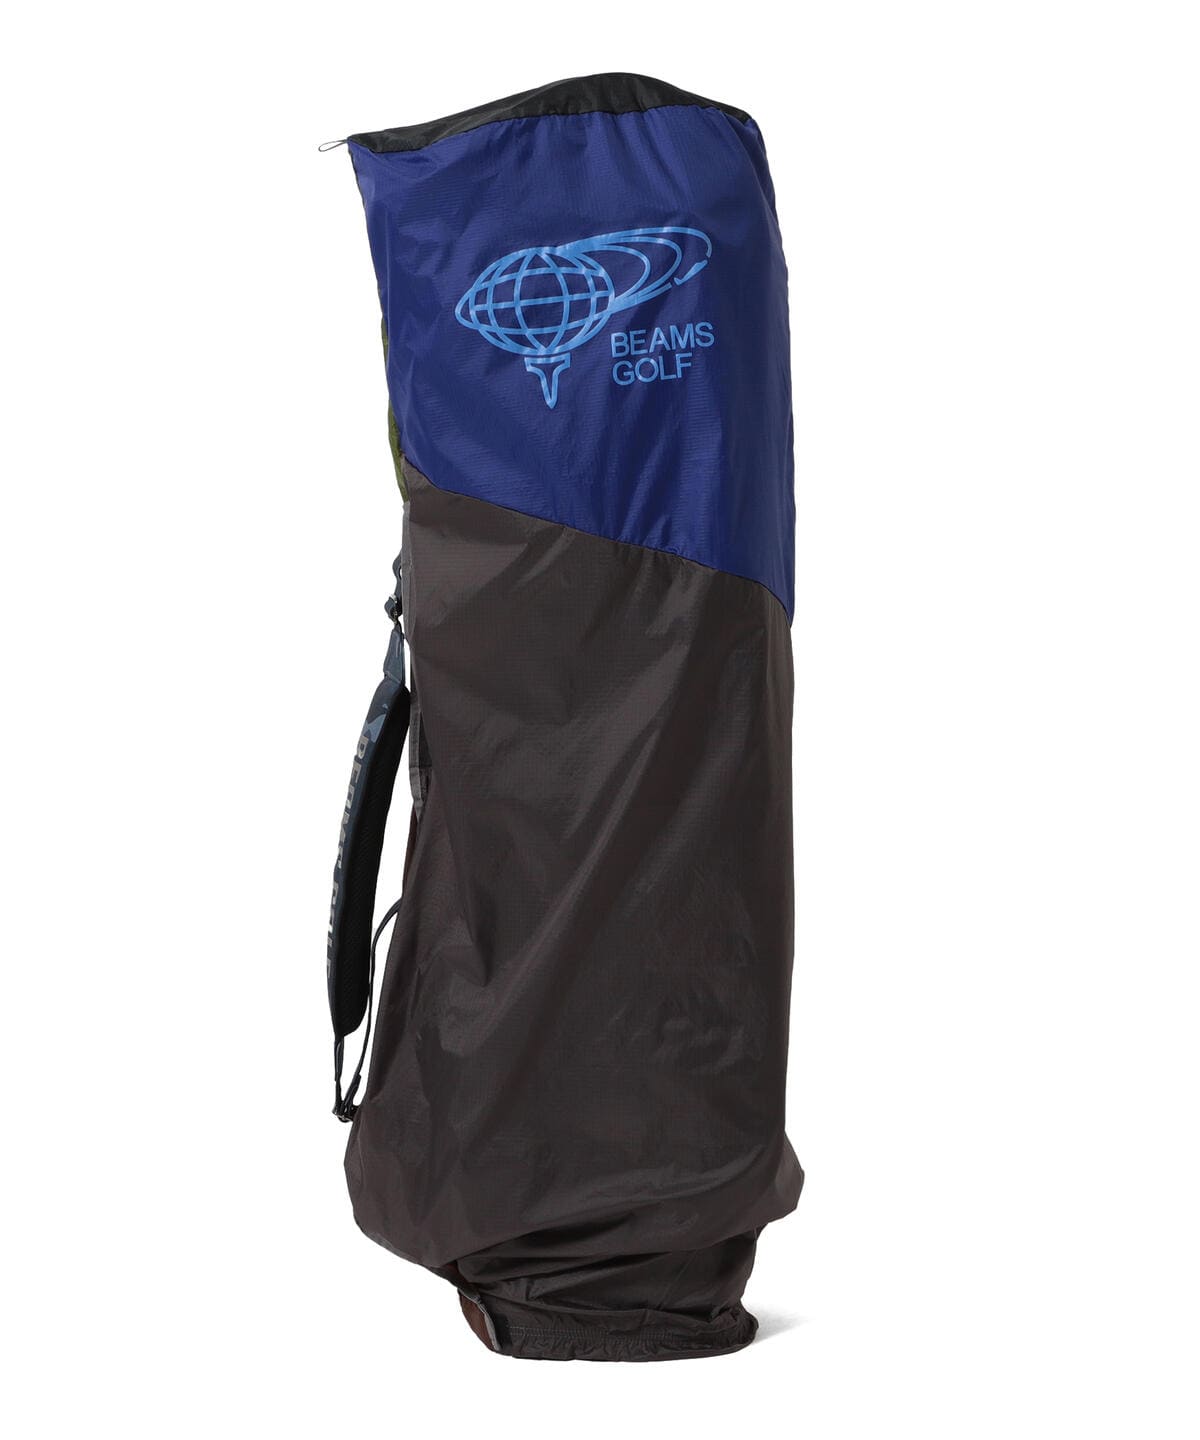 BEAMS GOLF BEAMS GOLF BEAMS GOLF / Packable Travel Cover (Outdoor 